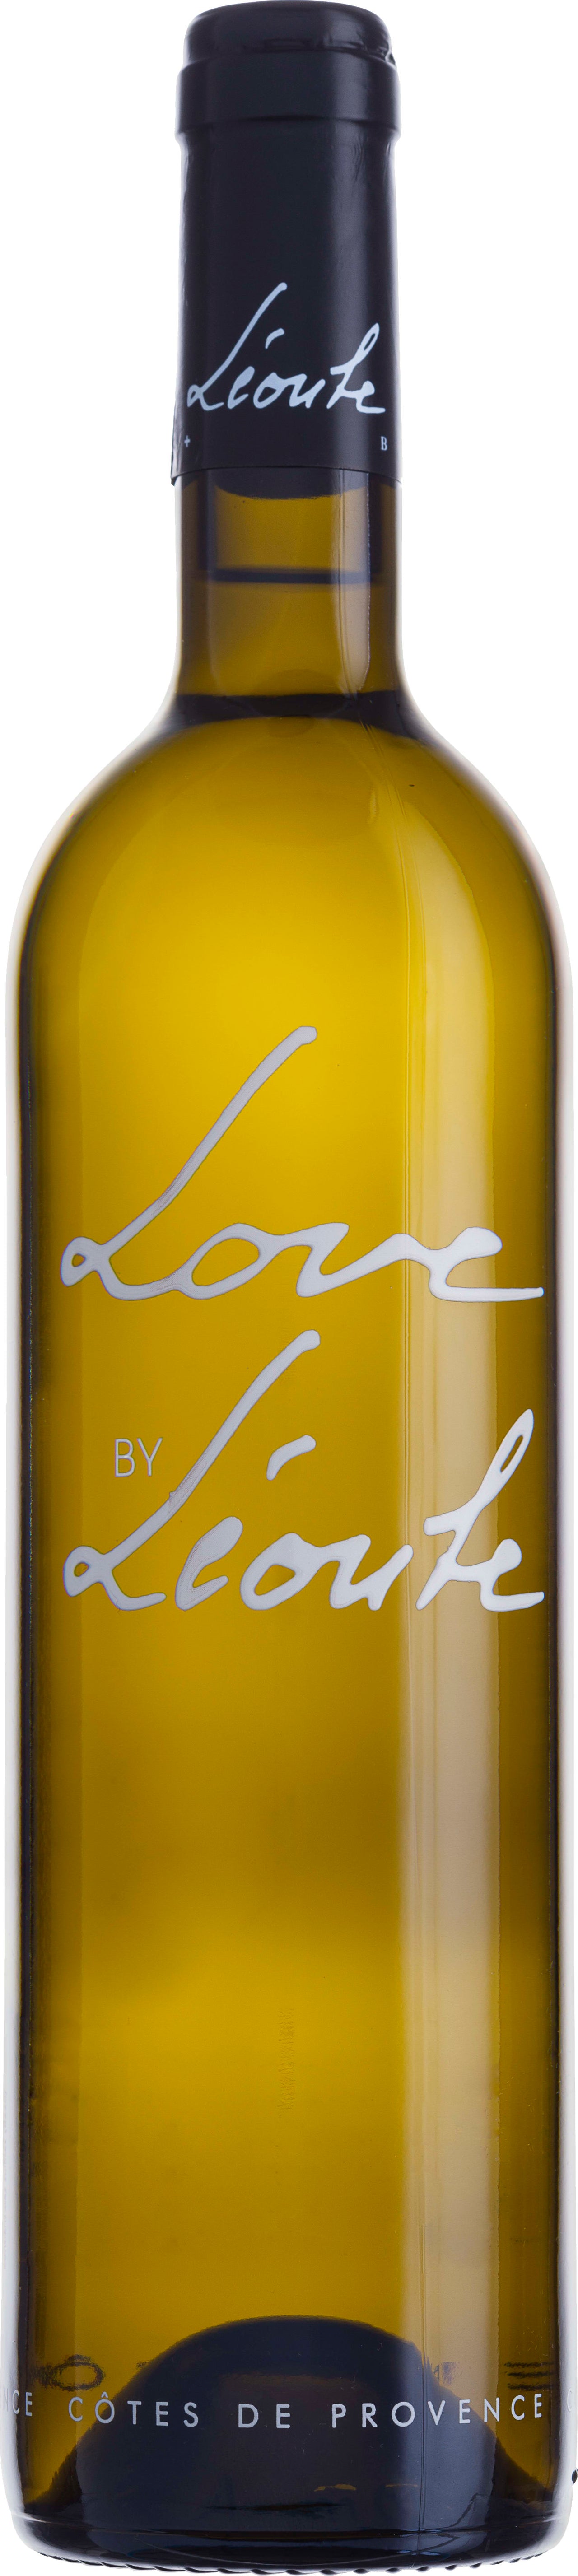 Chateau Leoube 2020 Love by Leoube Blanc Organic, Domaine de Leou 2020 75cl - Buy Chateau Leoube Wines from GREAT WINES DIRECT wine shop